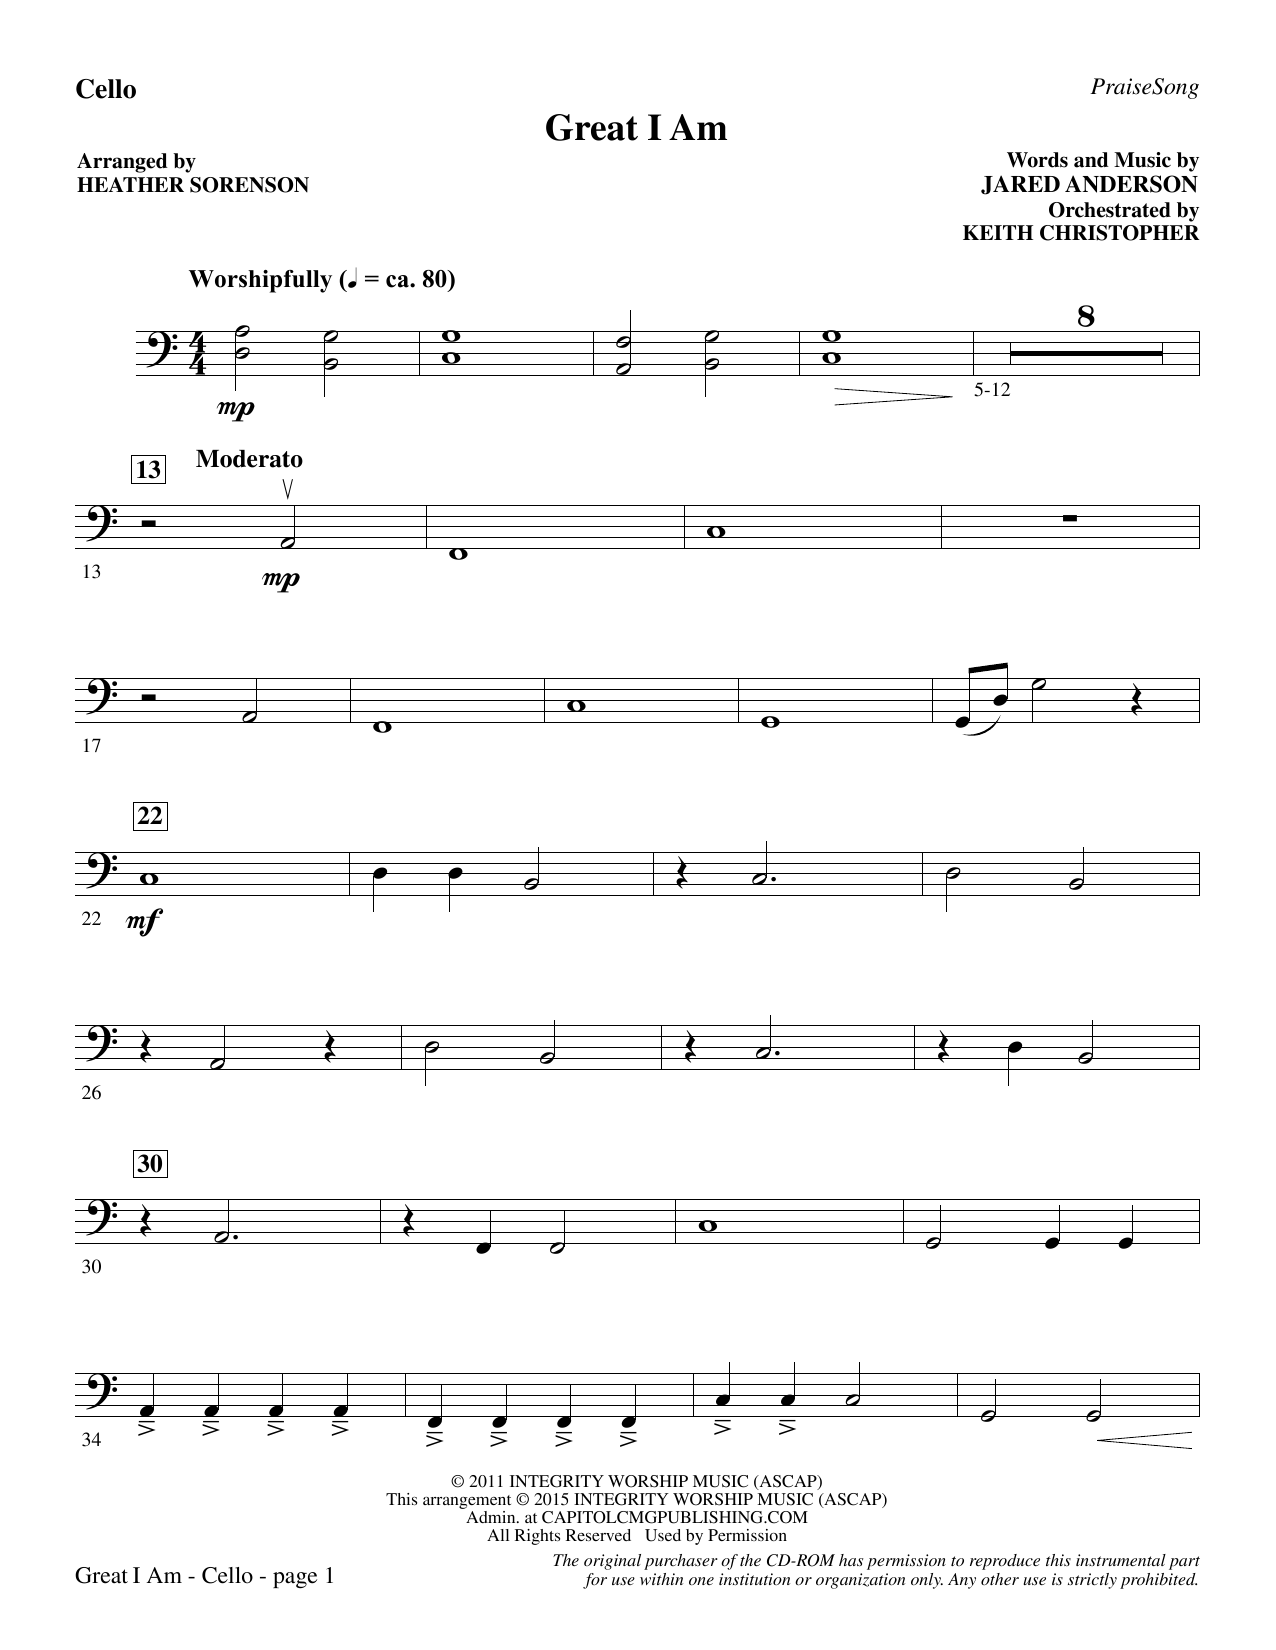 Heather Sorenson Great I Am - Cello sheet music notes and chords. Download Printable PDF.